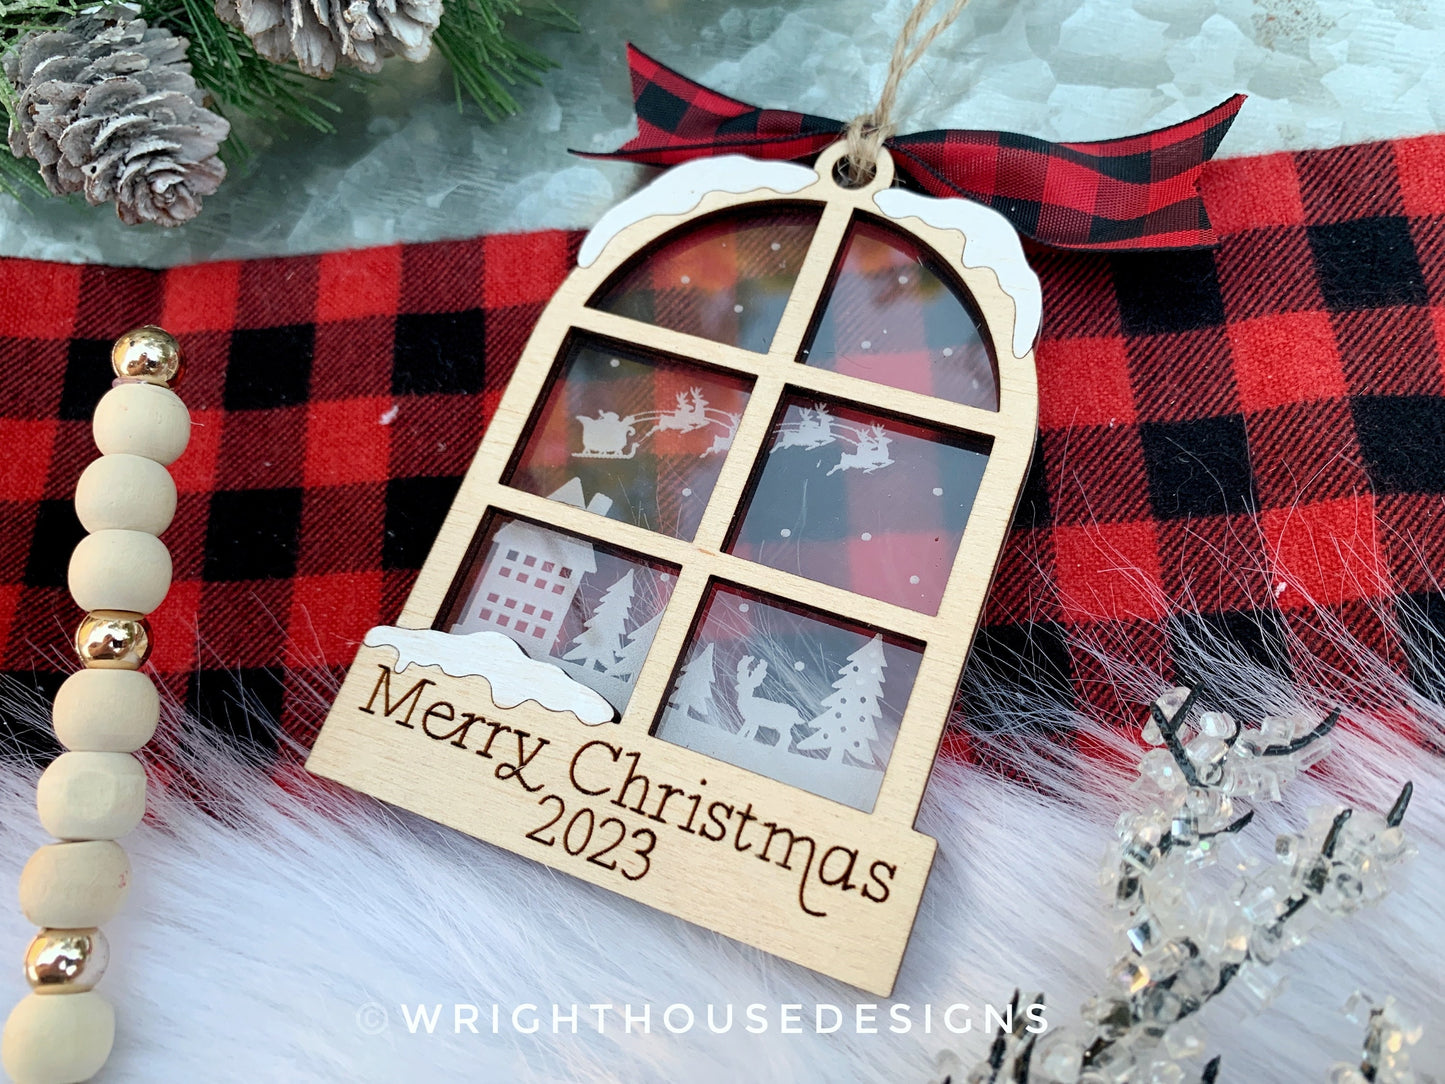 Santa Sleigh Winter Cabin Scene Ornament - Engraved Personalized Yearly Christmas Tree Ornament - Layered Wood and Acrylic Window Ornament